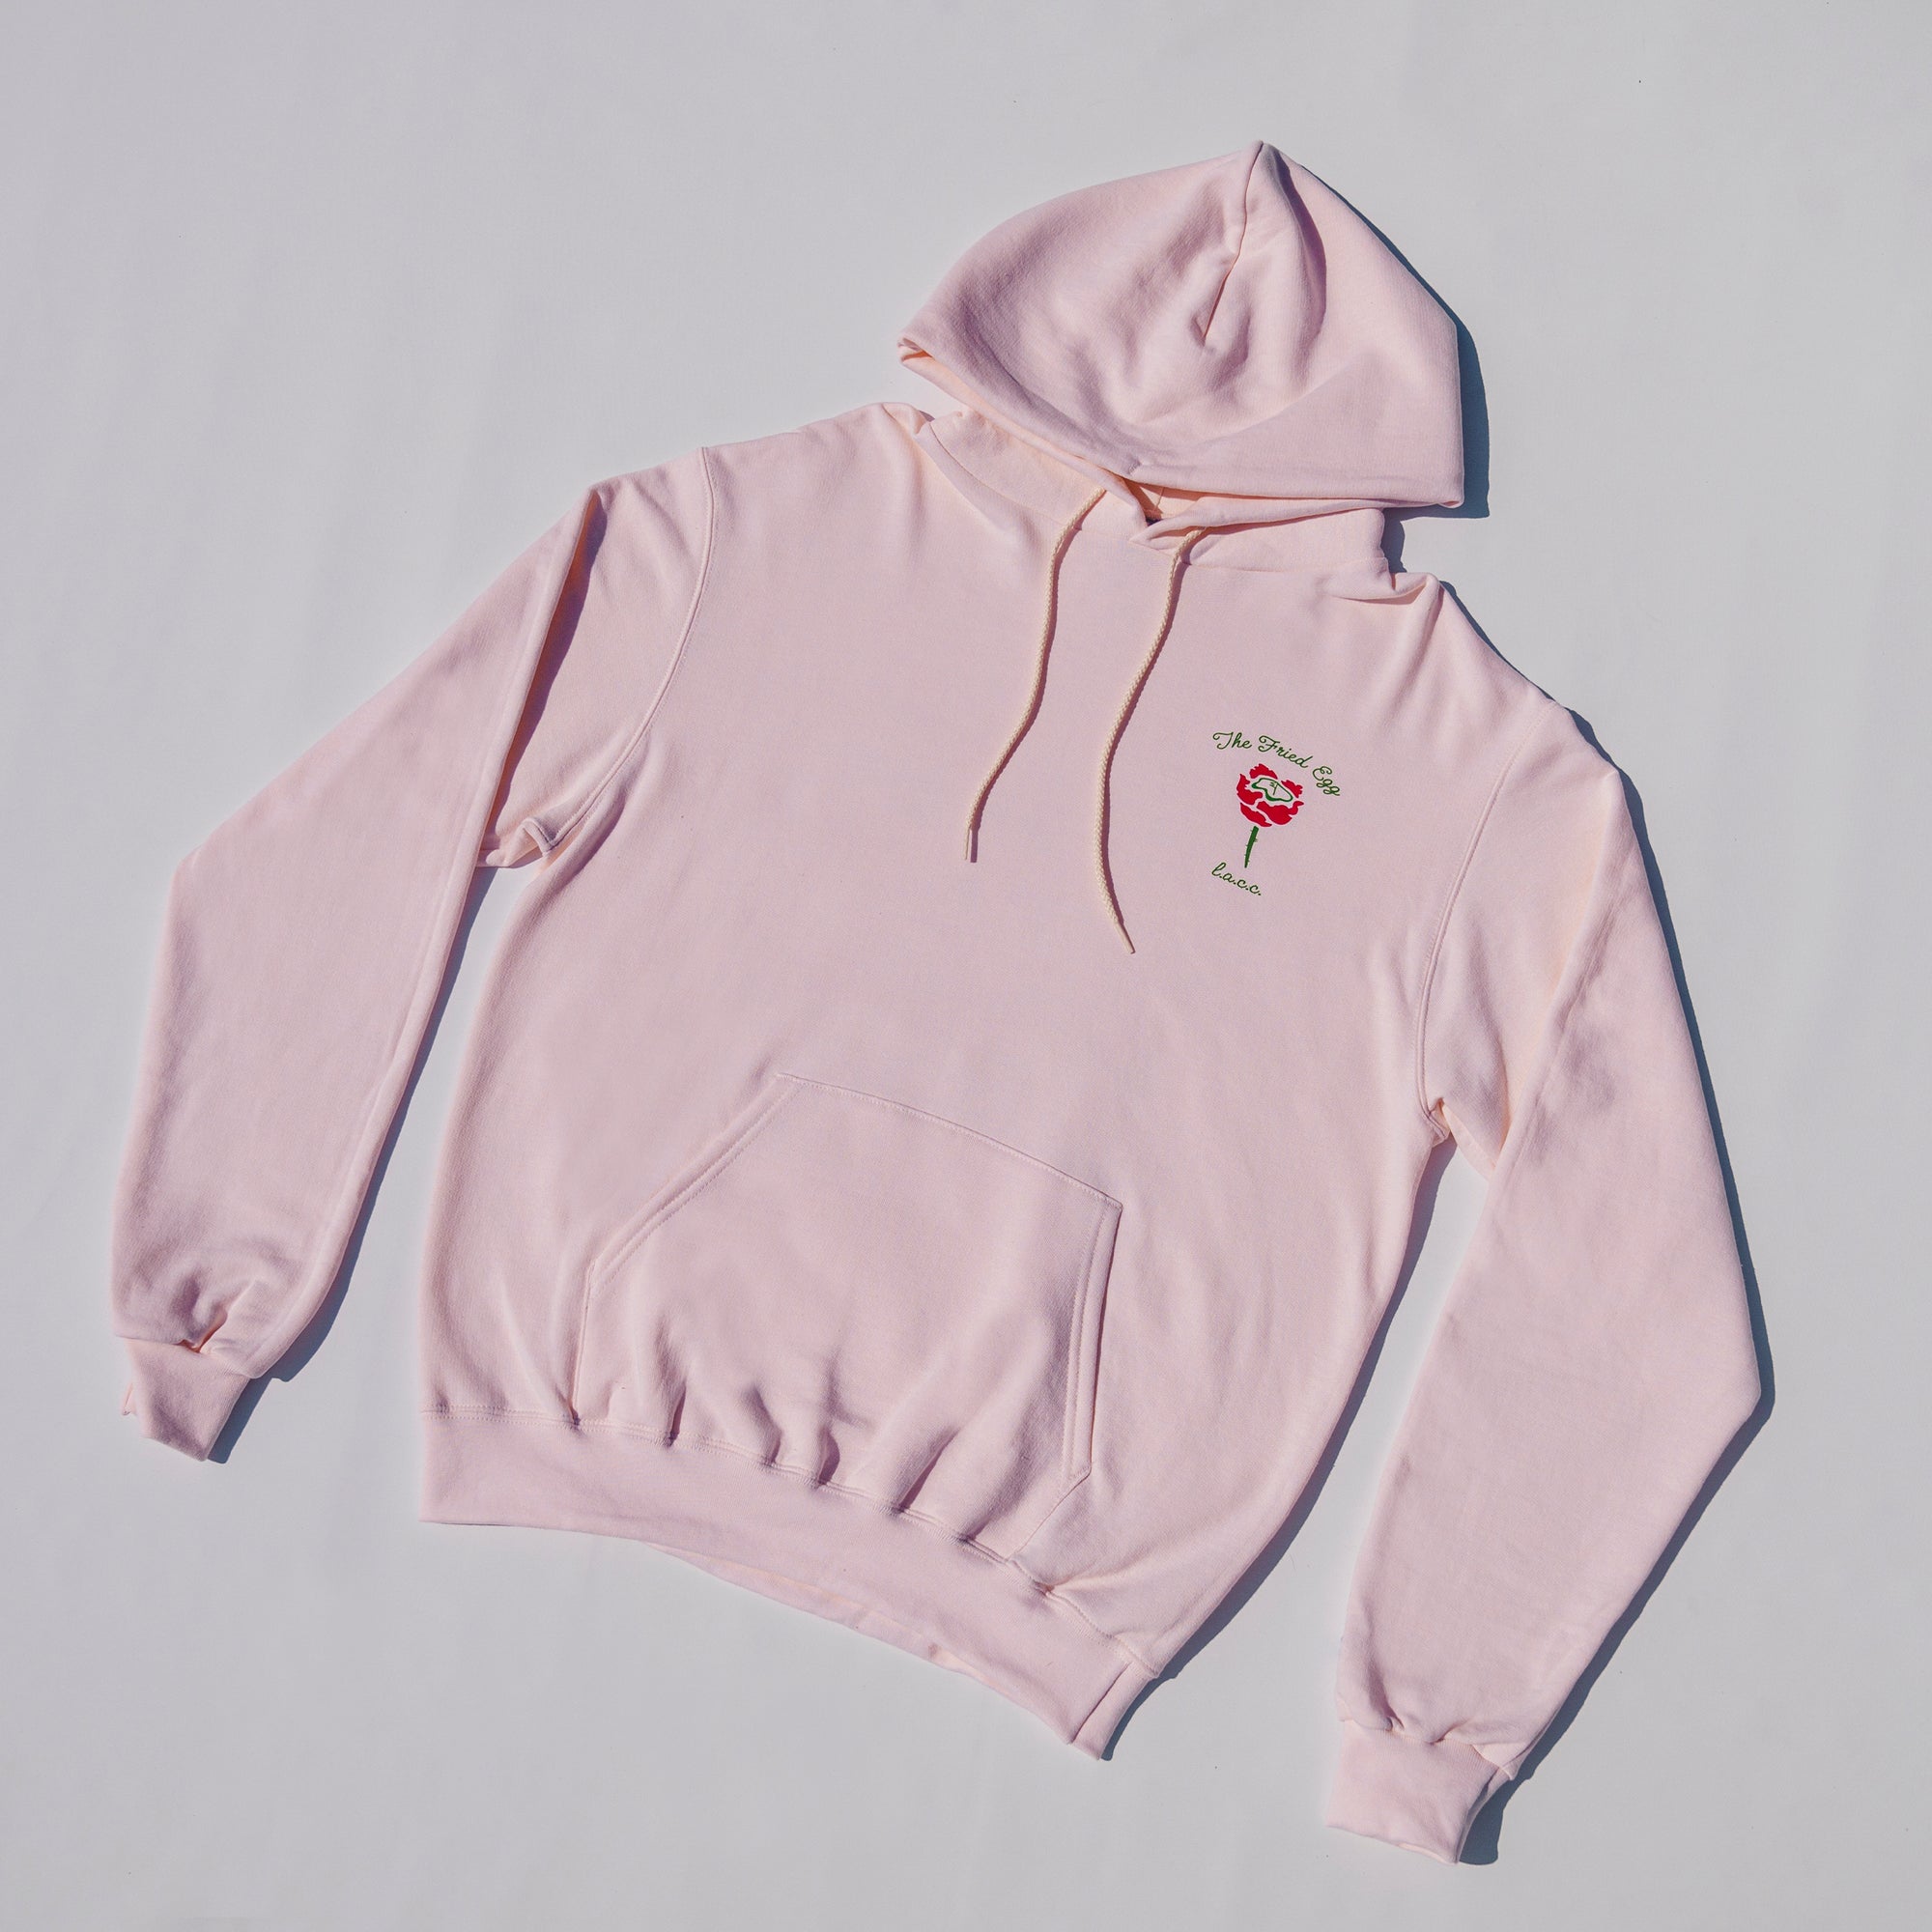 The Fried Egg Rose & Champion Hoodie